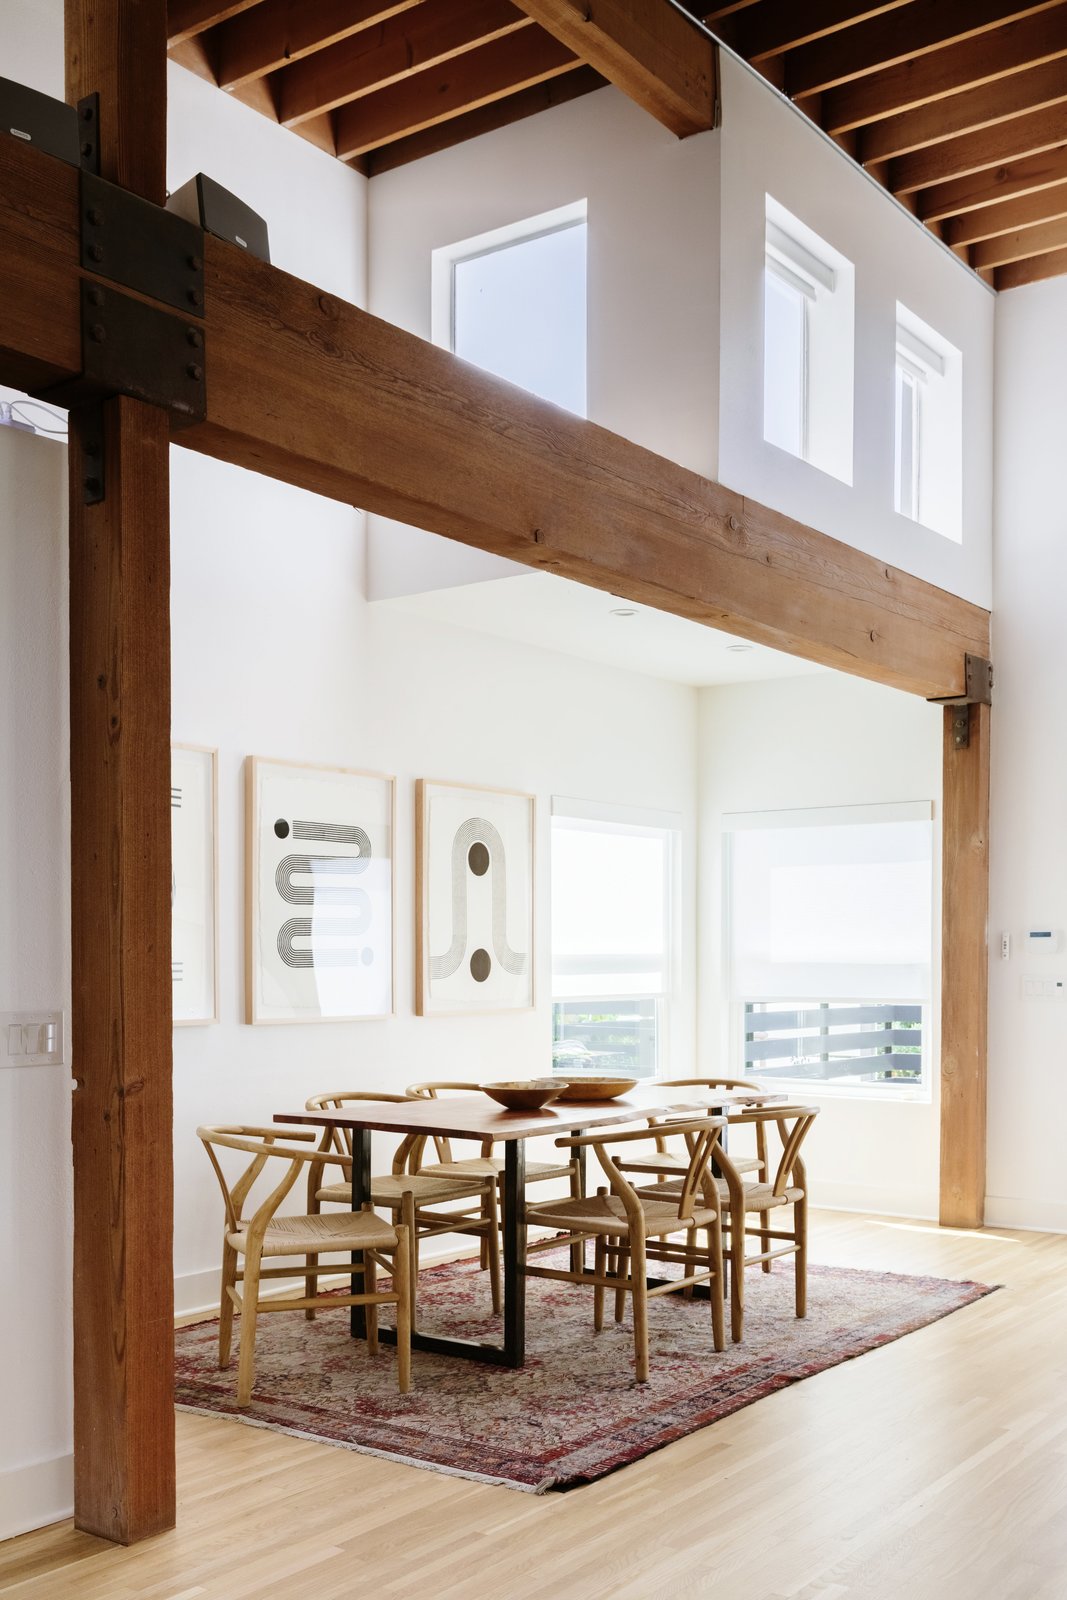 a dining nook is framed by timber beams running above the space the sunny corner is illuminated by an additional grouping of clerestory windows